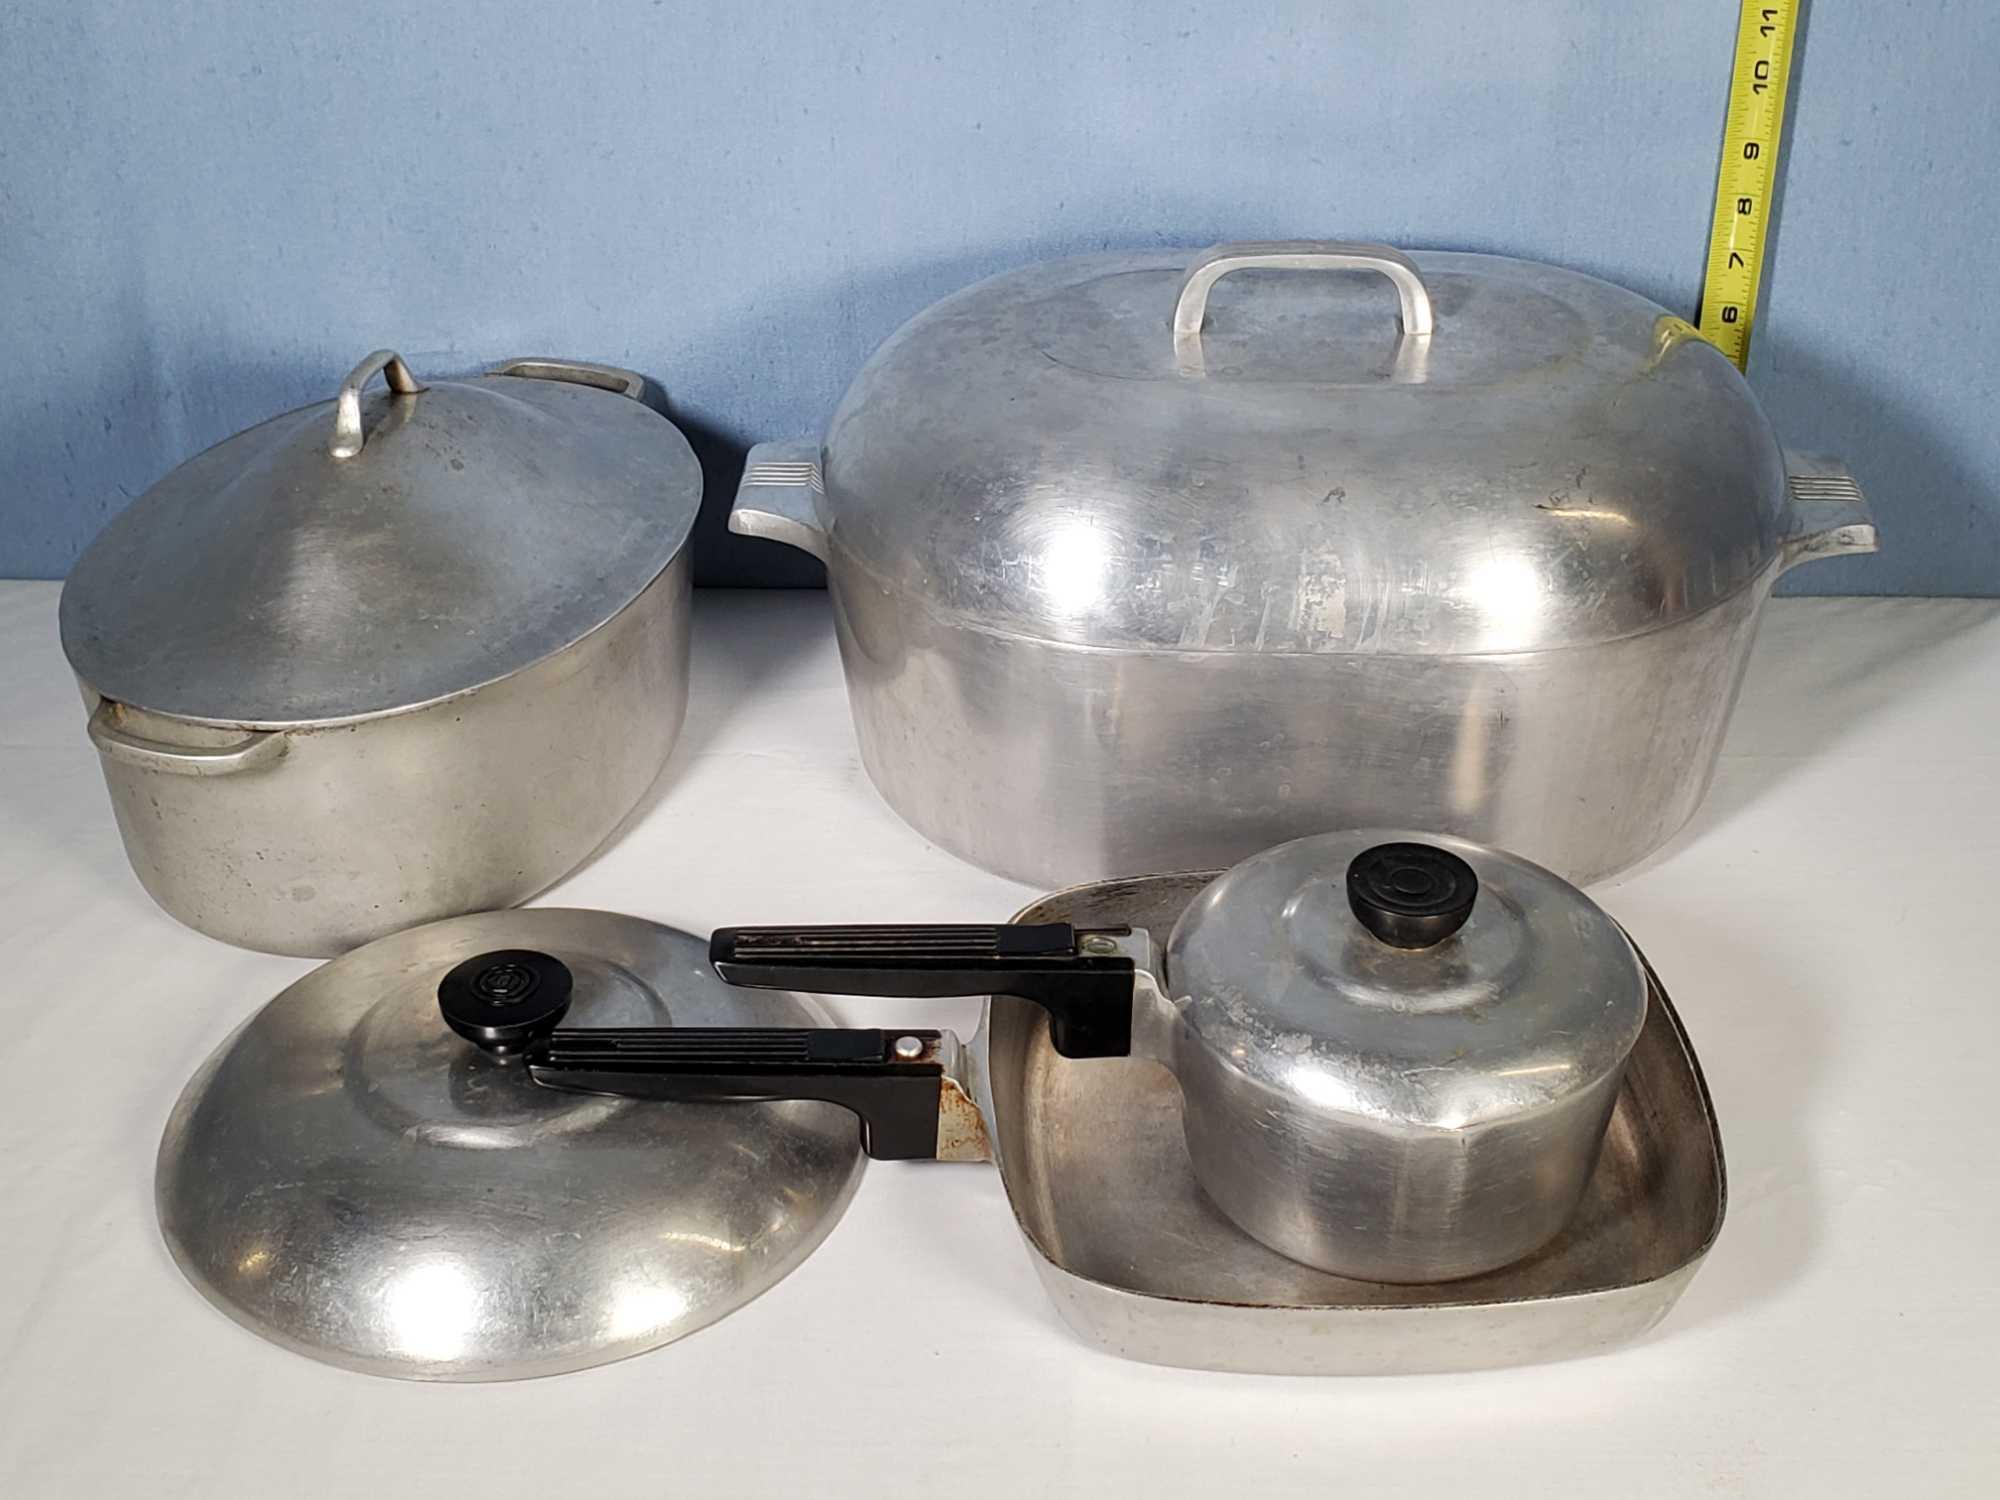 Wagner Ware Magnalite 13 QT. Roaster/dutch Oven, Made by GHC, Trivet  Included. B see Shipping Comments in the Description 